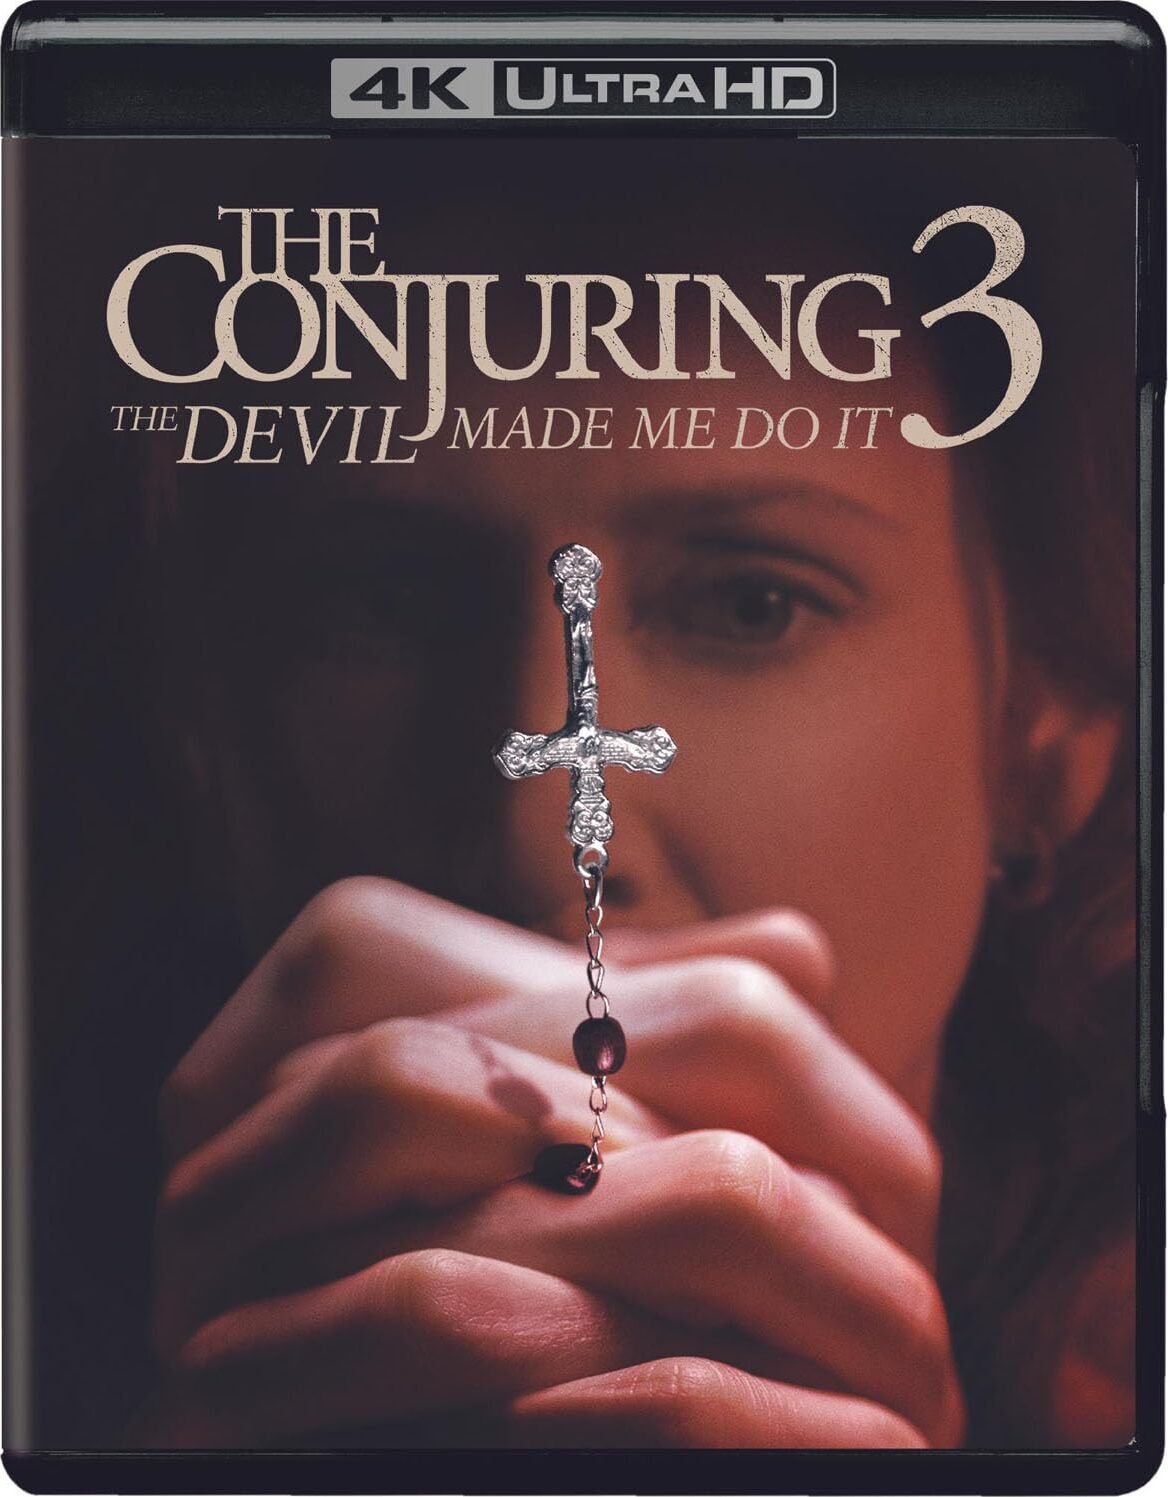 THE CONJURING 3: THE DEVIL MADE ME DO IT 4K UHD/BLU-RAY